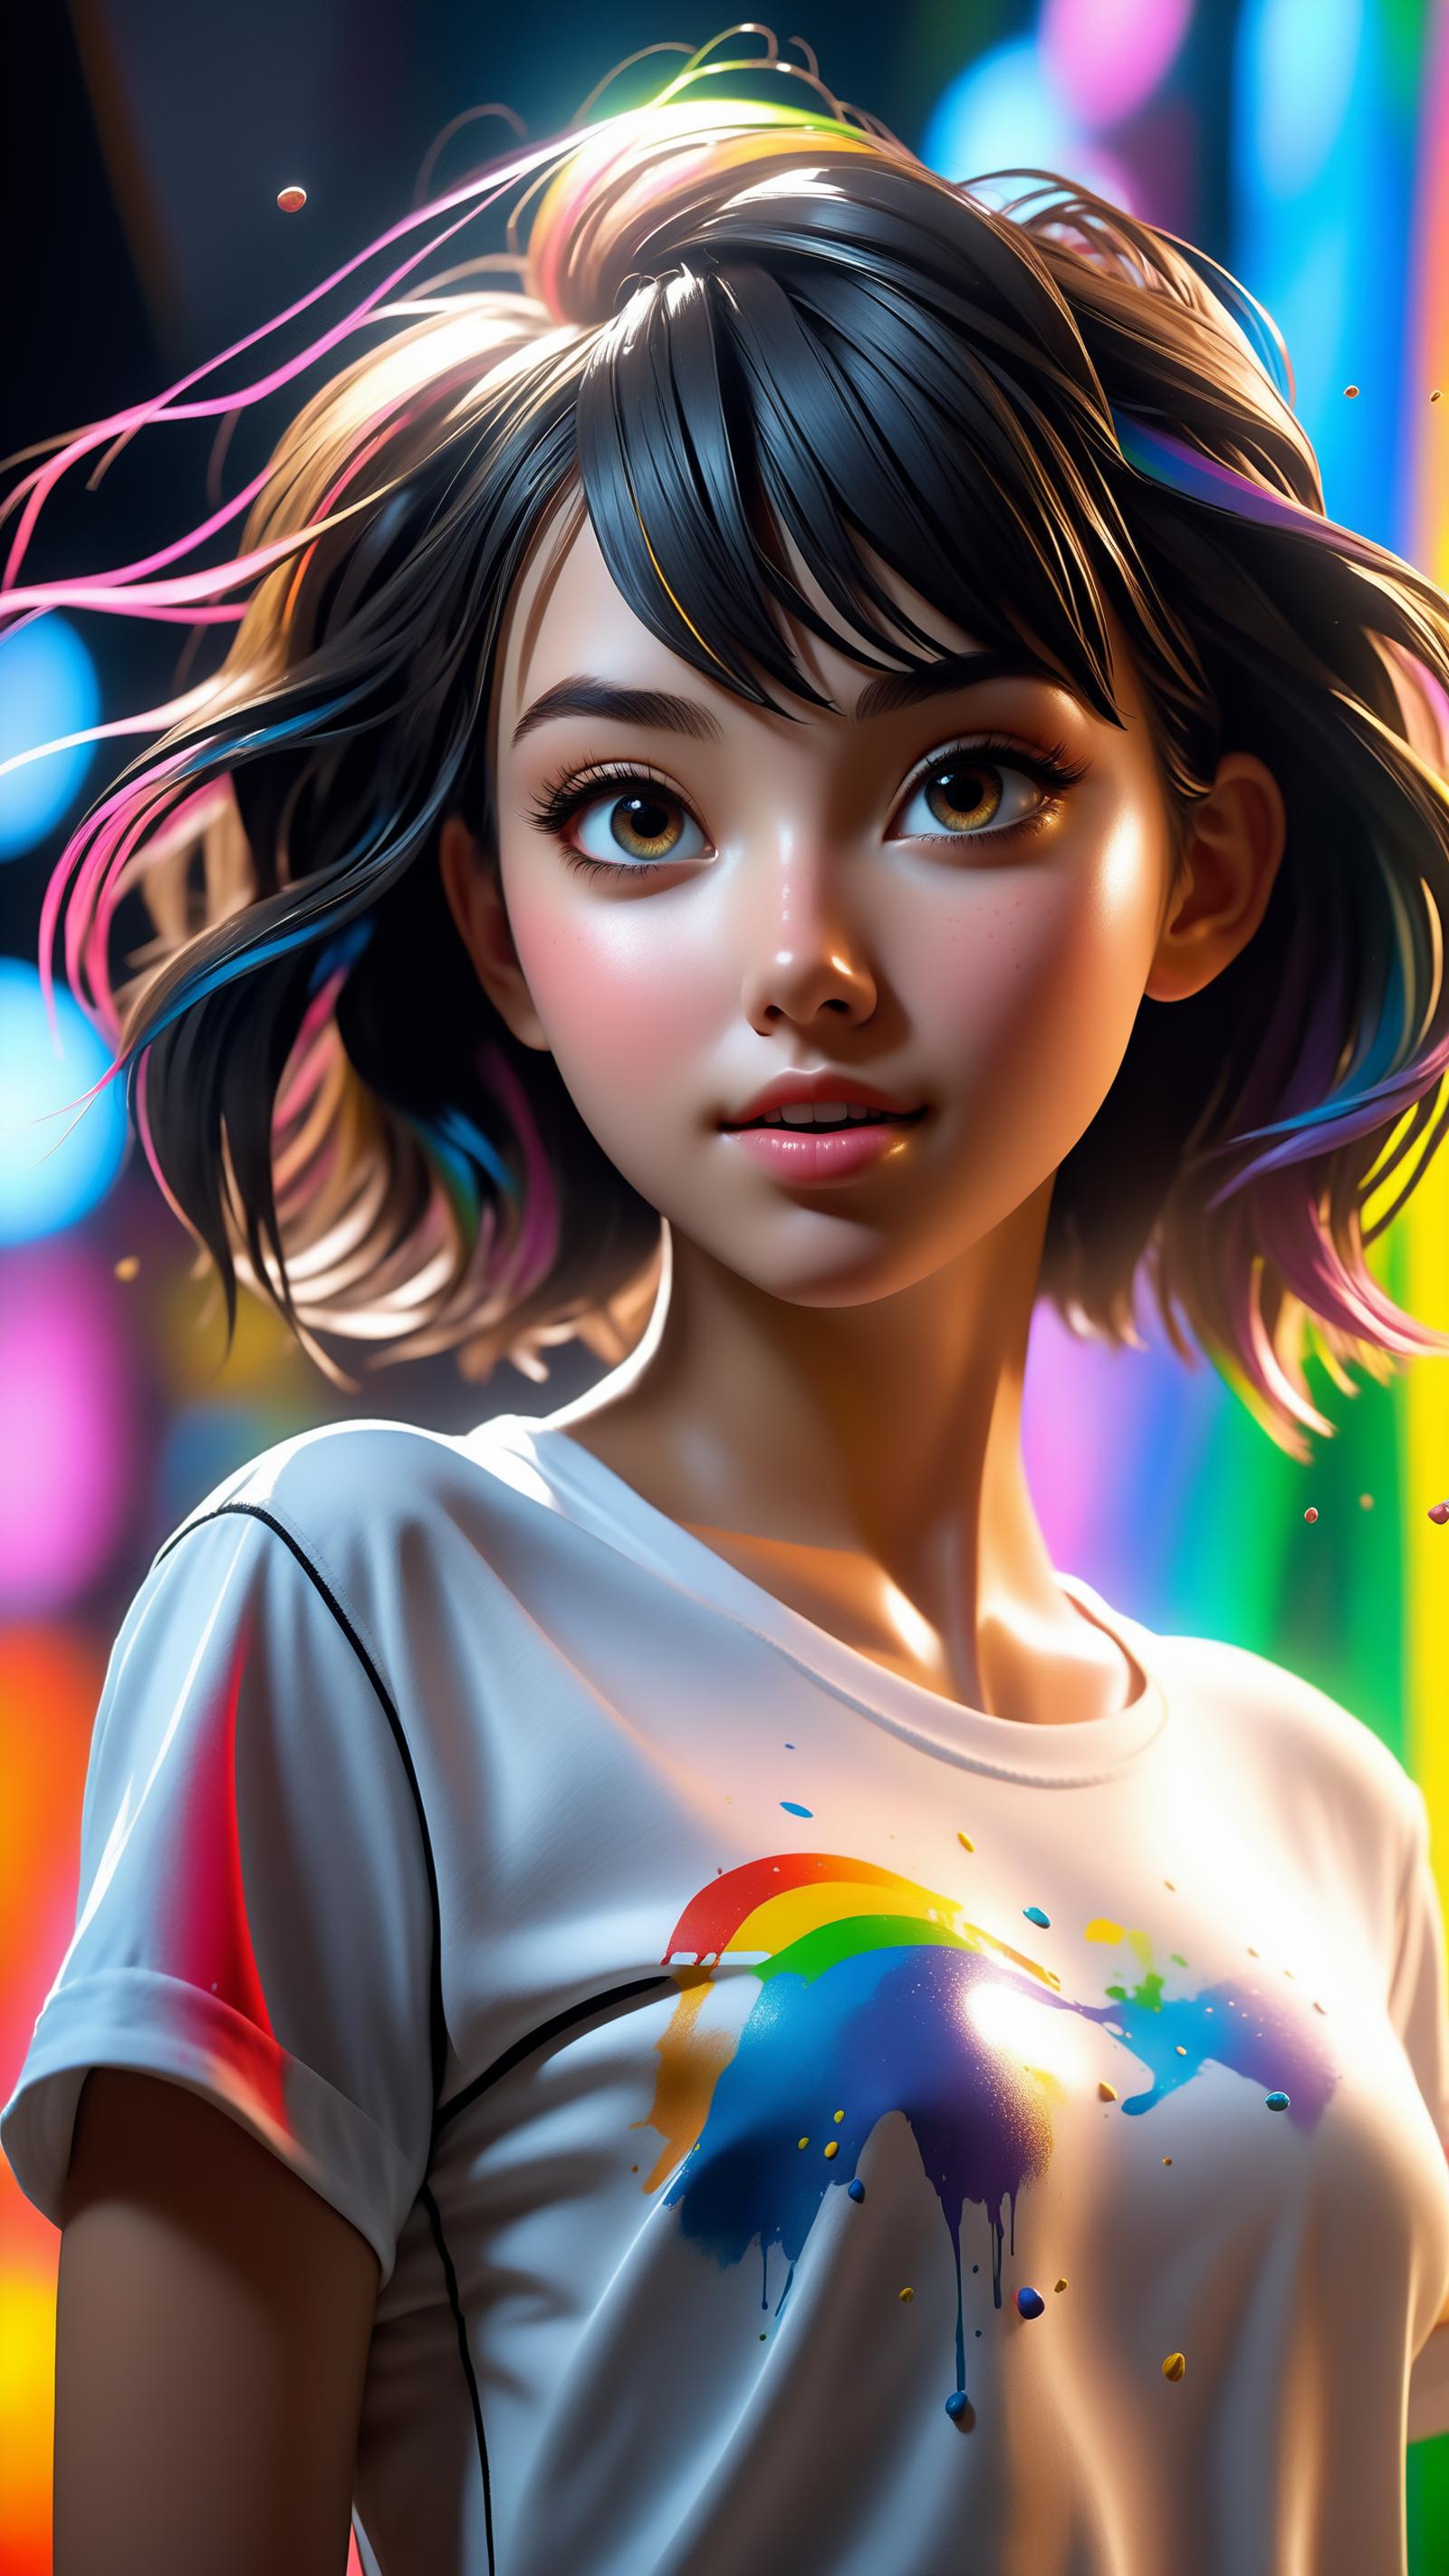 A cartoon character with a colorful rainbow shirt and a pink nose.